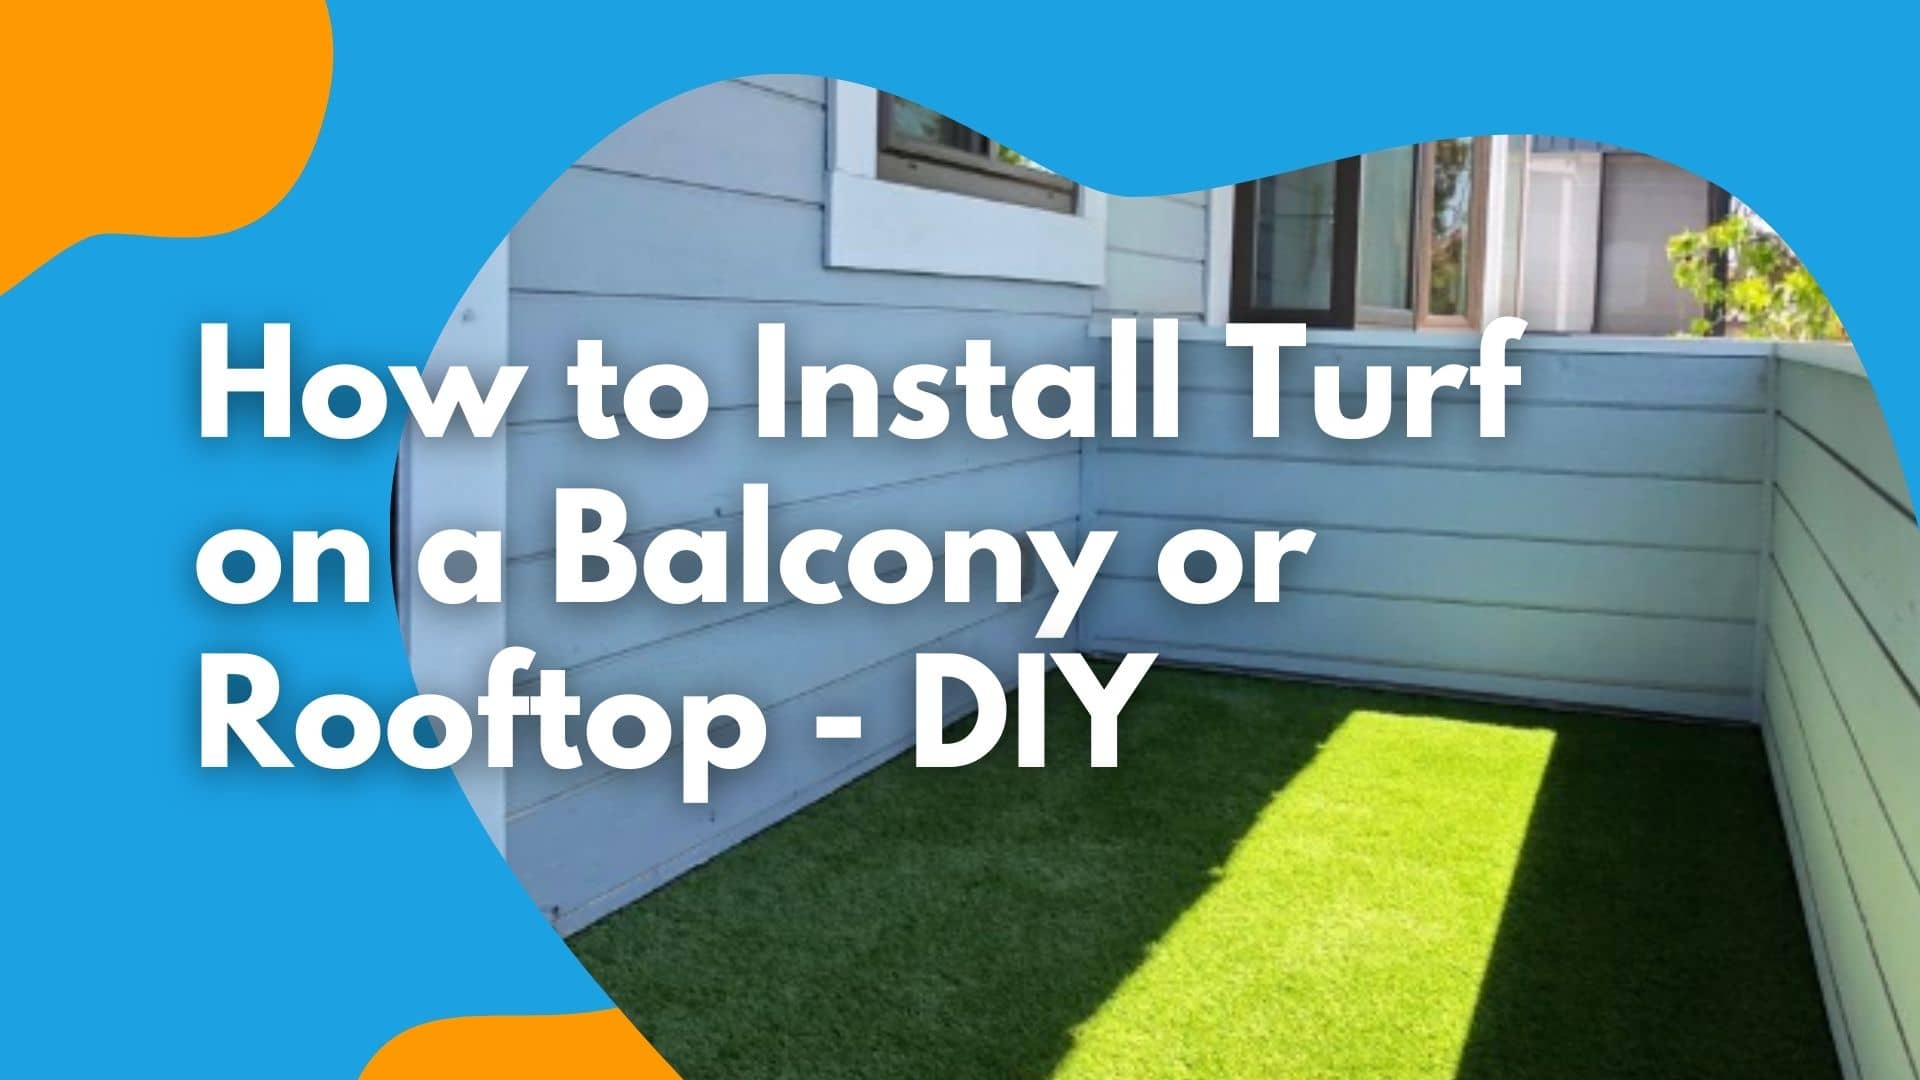 How to Install Turf on a Balcony or Rooftop - DIY